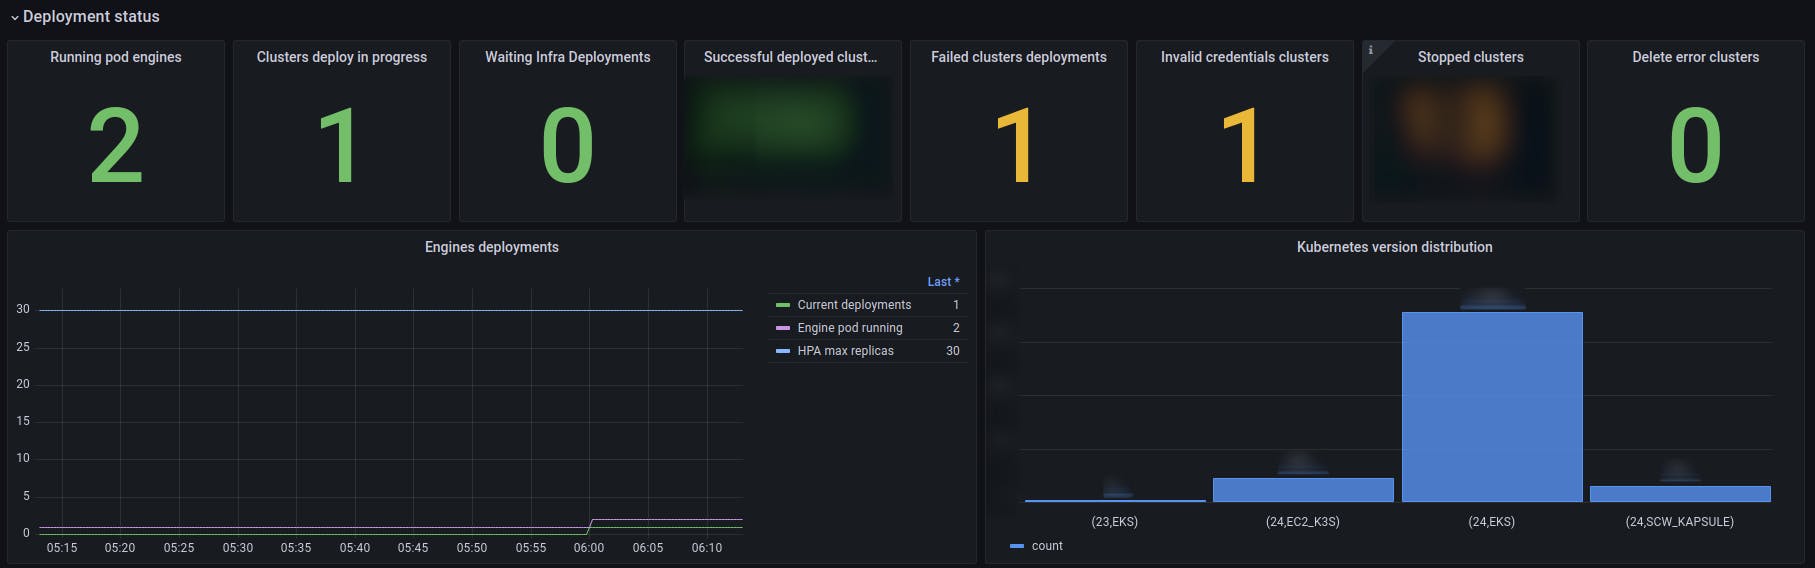 Clusters upgraded dashboard - we can know the total number of clusters and their associated Kubernetes version